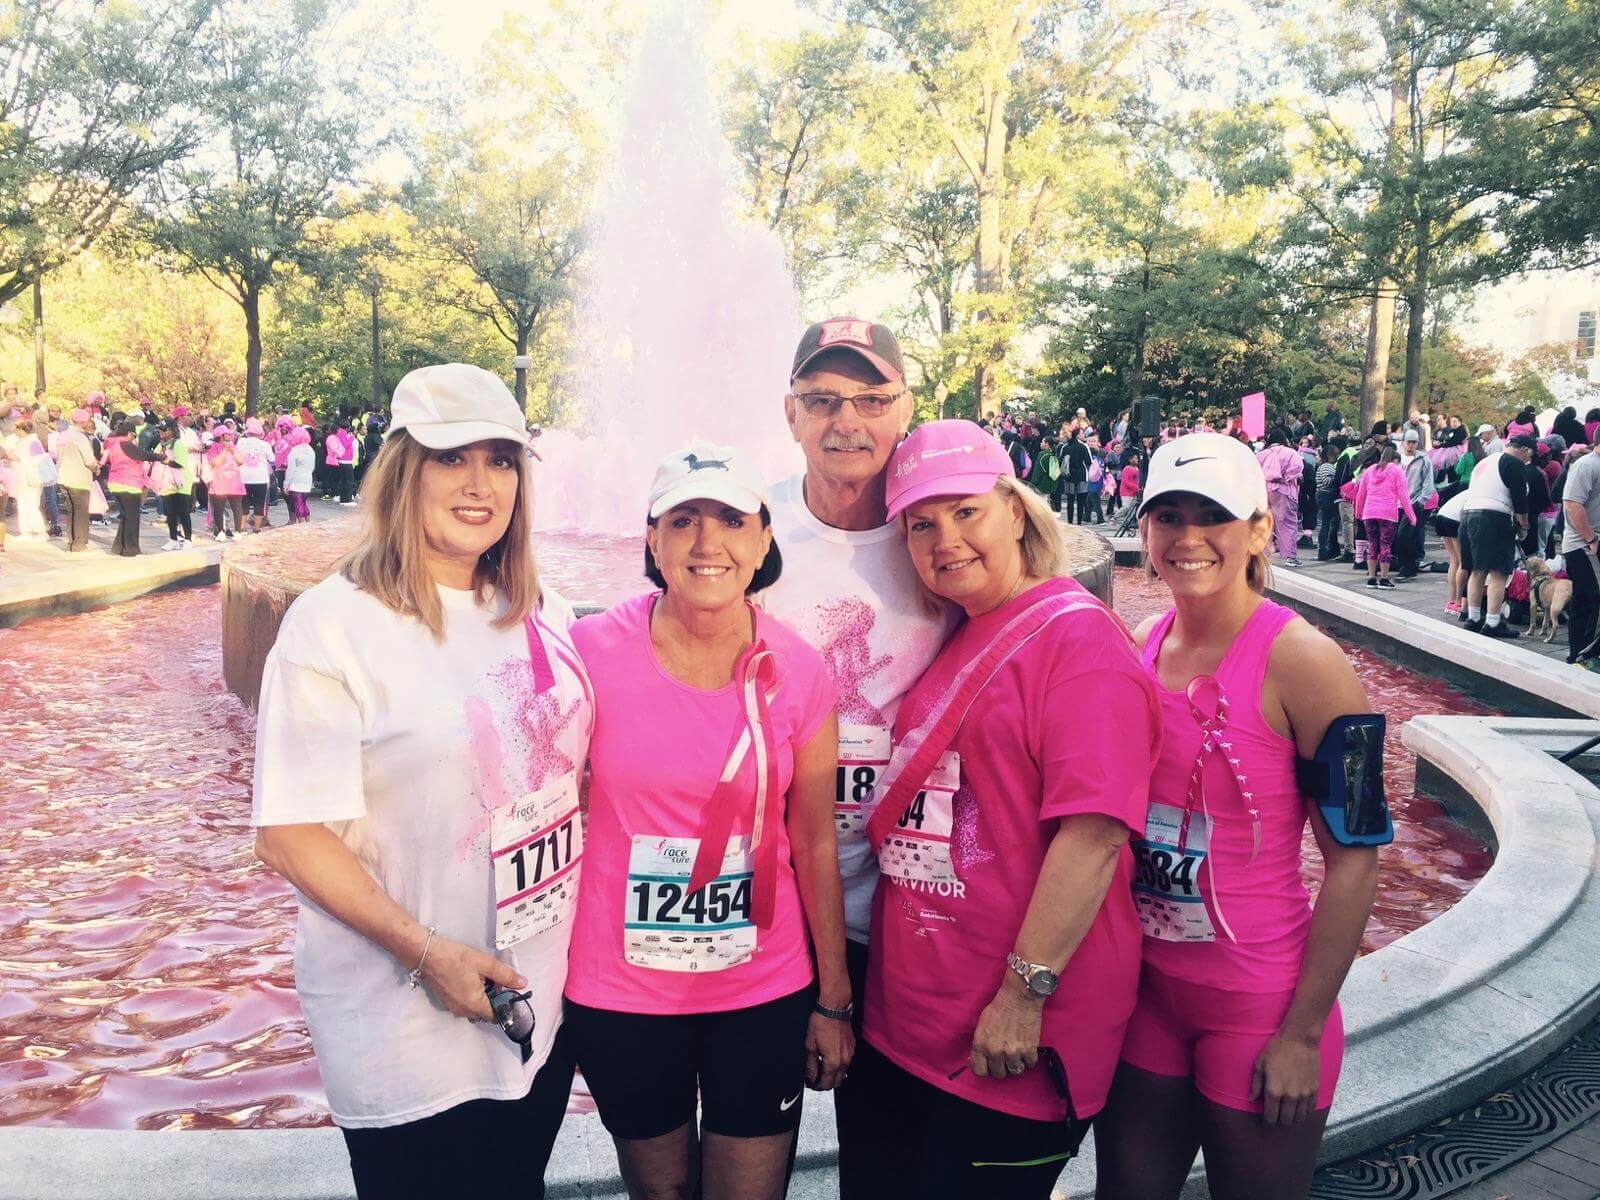 Dianne Tucker, Beverly Seeley, Rick Morrell, Pam Morrell and Mimi Seeley at the Race for the Cure